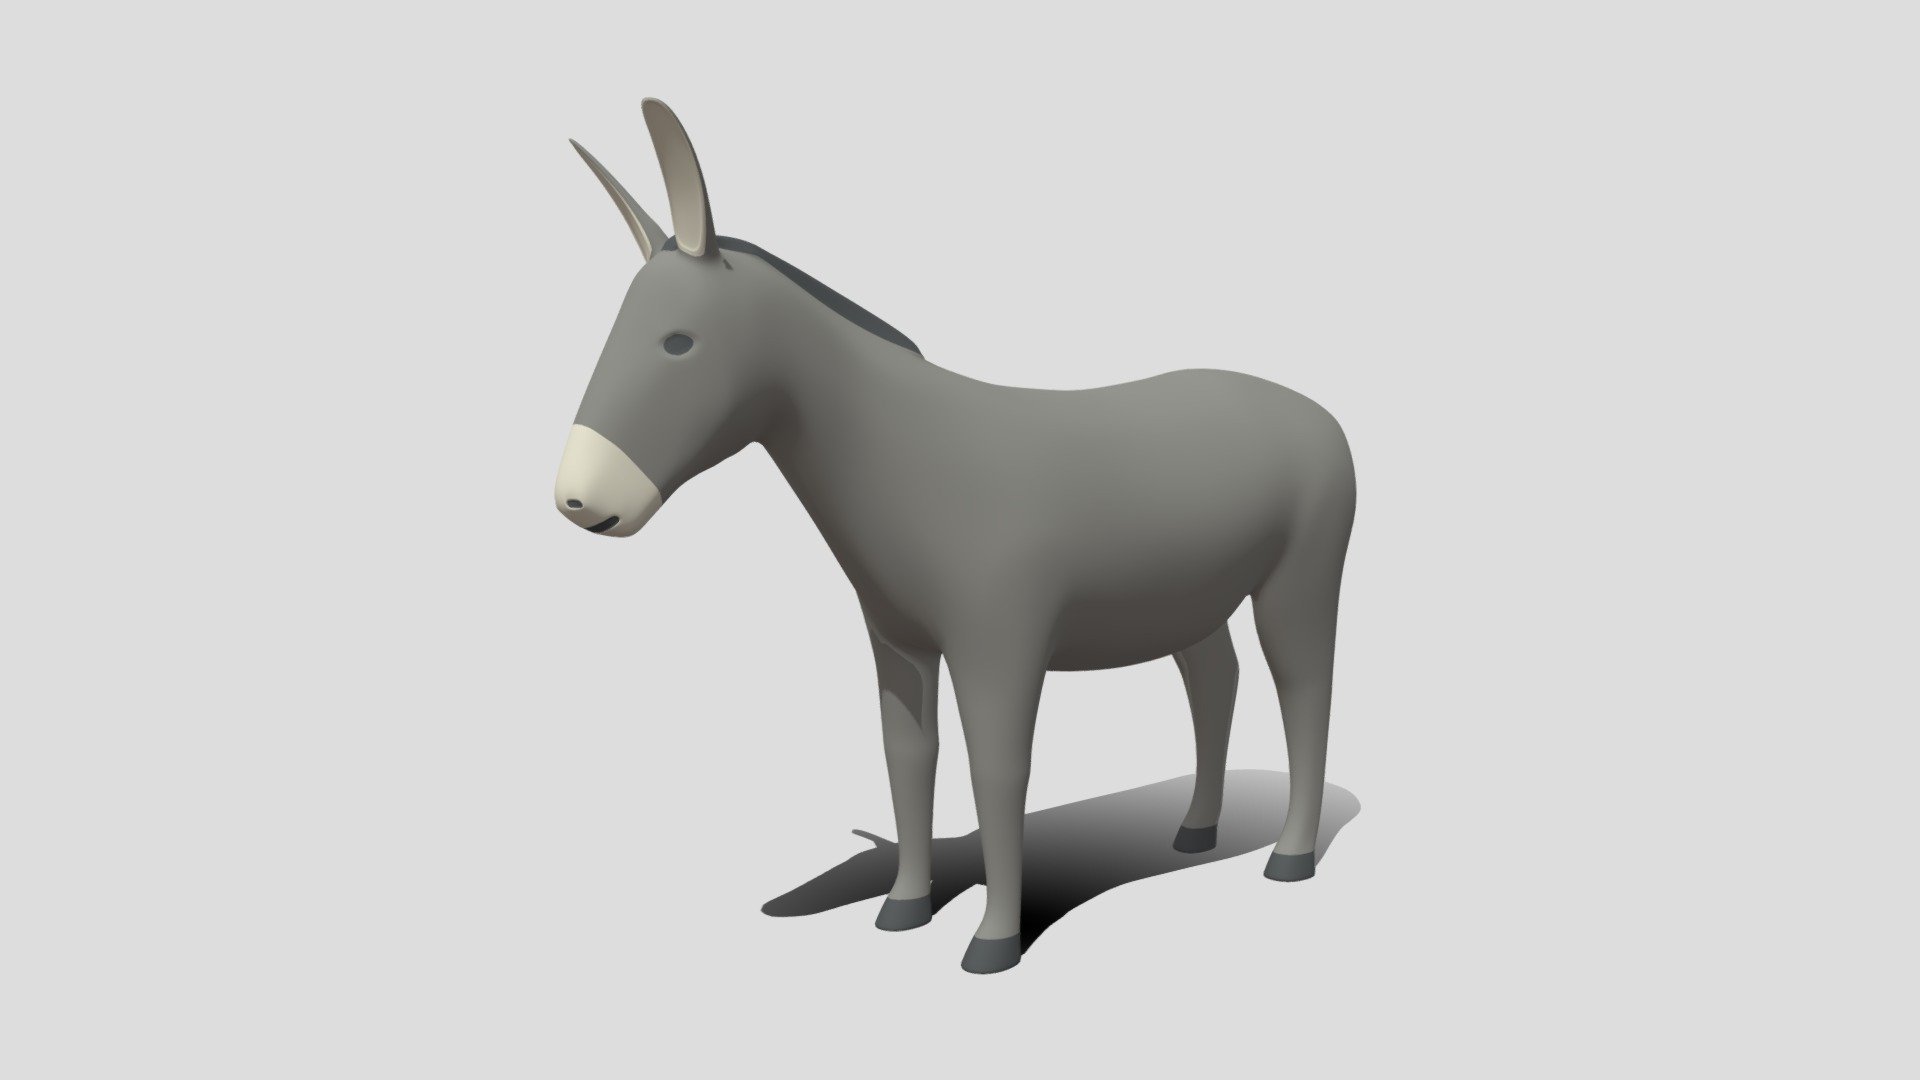 This is a 3d model of a cartoon donkey. The 3D donkey was modeled and prepared for cartoon style renderings, background, general CG visualization etc presented as a mesh with quads only.

Verts : 19.074 Faces: 19.072

The 3d donkey have simple materials with diffuse colors.

No ring, maps and no UVW mapping is available.

The original file was created in blender. You will receive a 3DS, OBJ, FBX, blend, DAE, Stl.

All preview images were rendered with Blender Cycles. Product is ready to render out-of-the-box. Please note that the lights, cameras, and background is only included in the .blend file. The model is clean and alone in the other provided files, centred at origin and has real-world scale 3d model